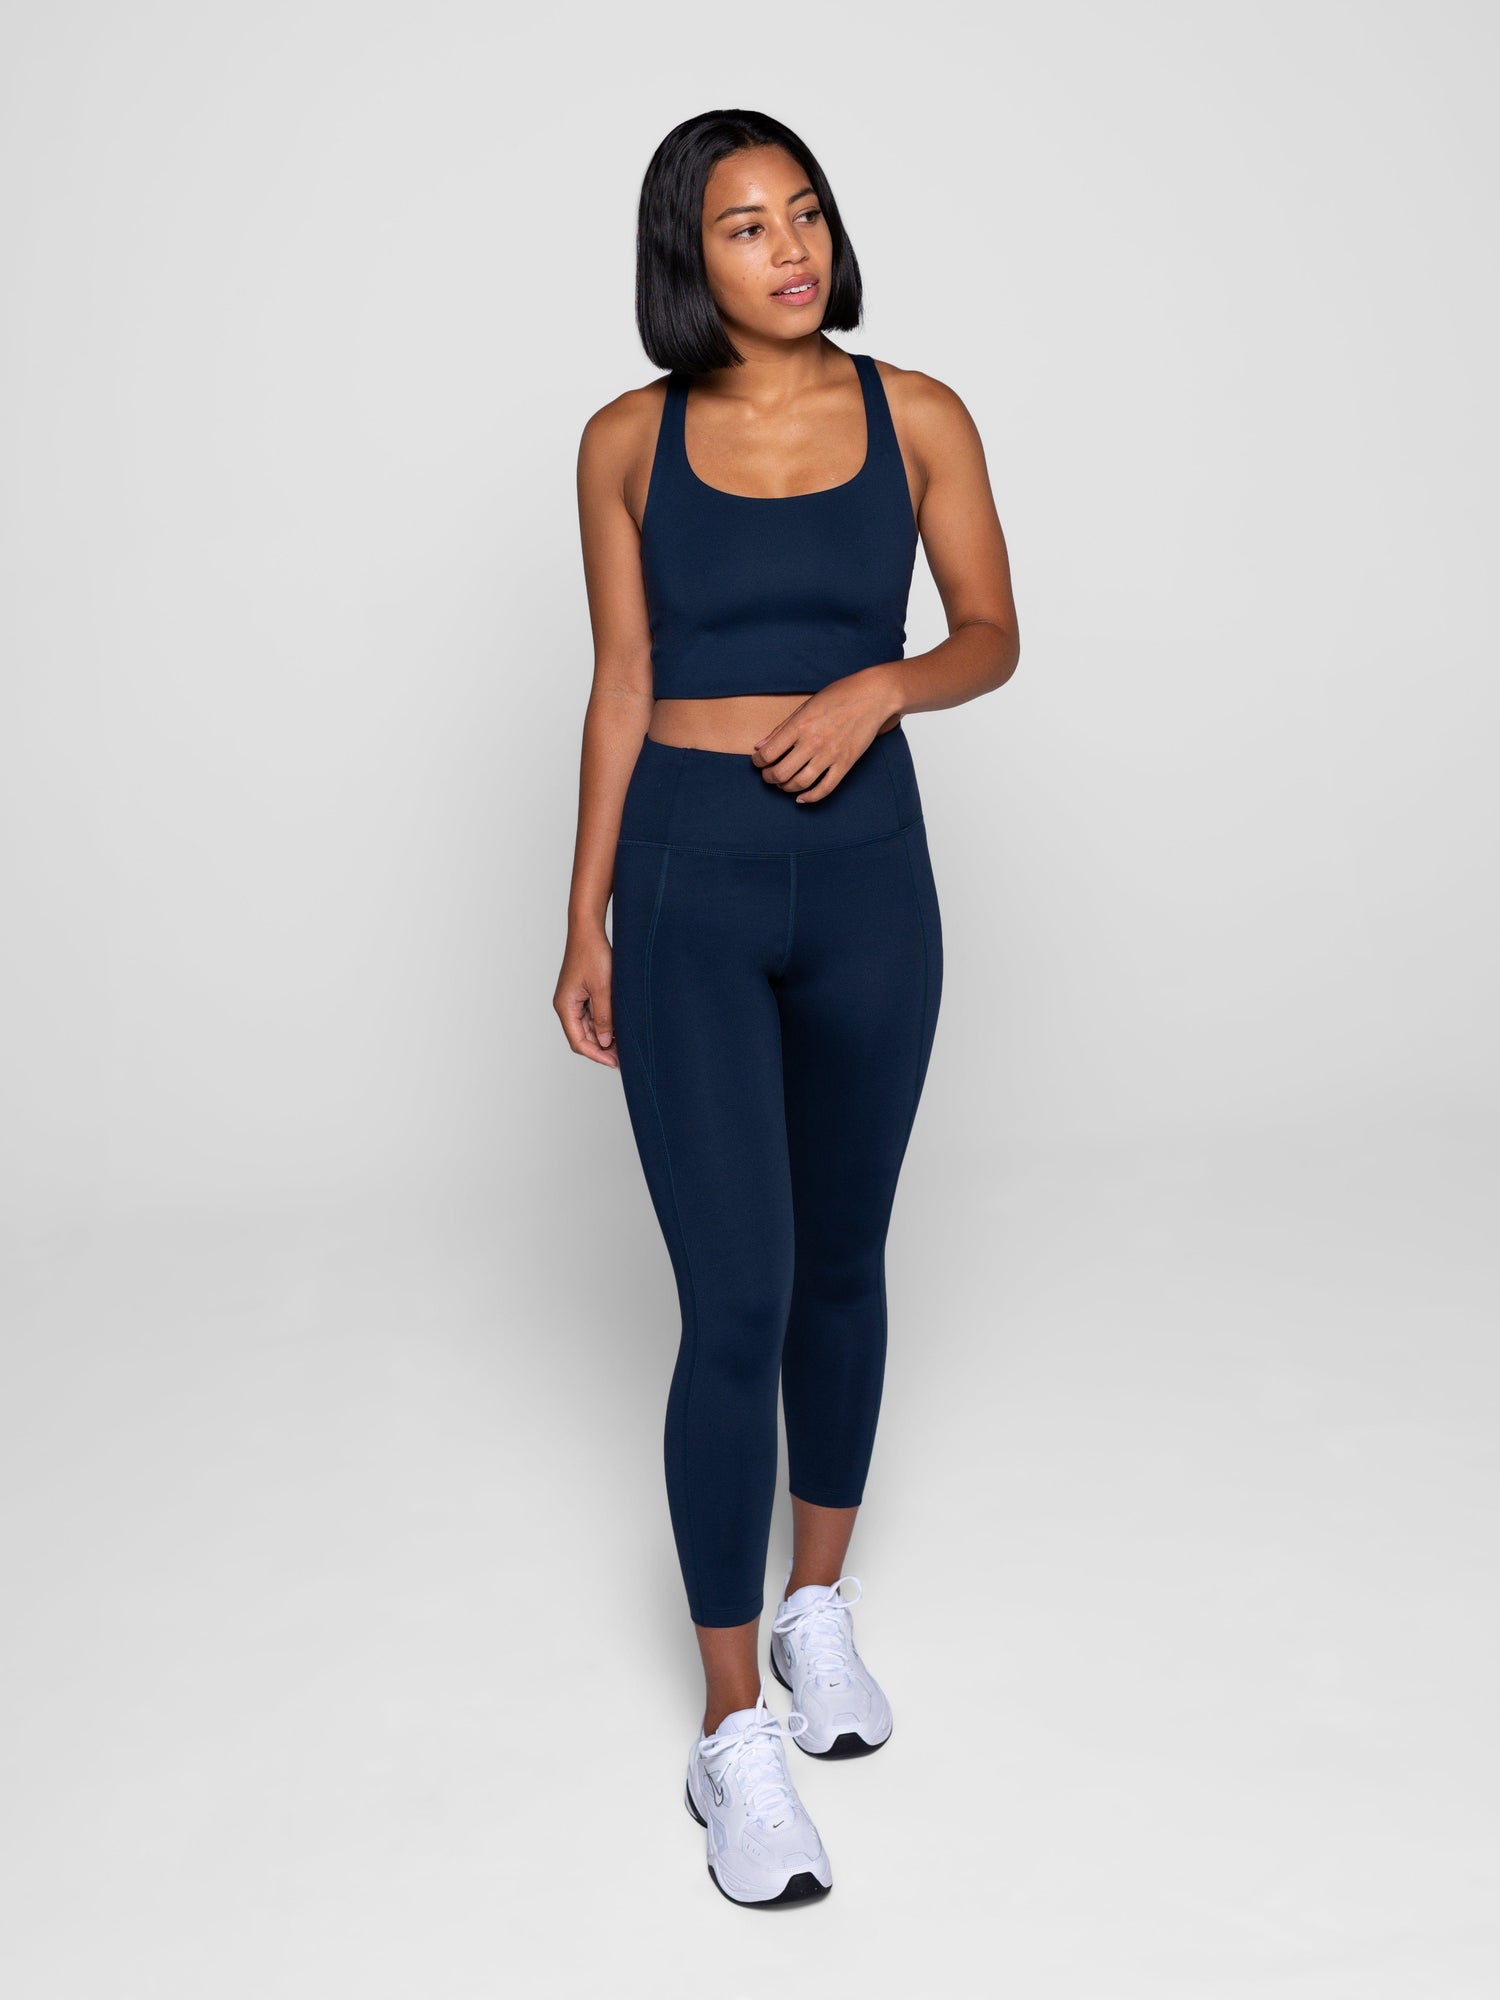 Girlfriend Collective - W's Compressive Legging - 7/8 - Made From Recycled Plastic Bottles - Weekendbee - sustainable sportswear